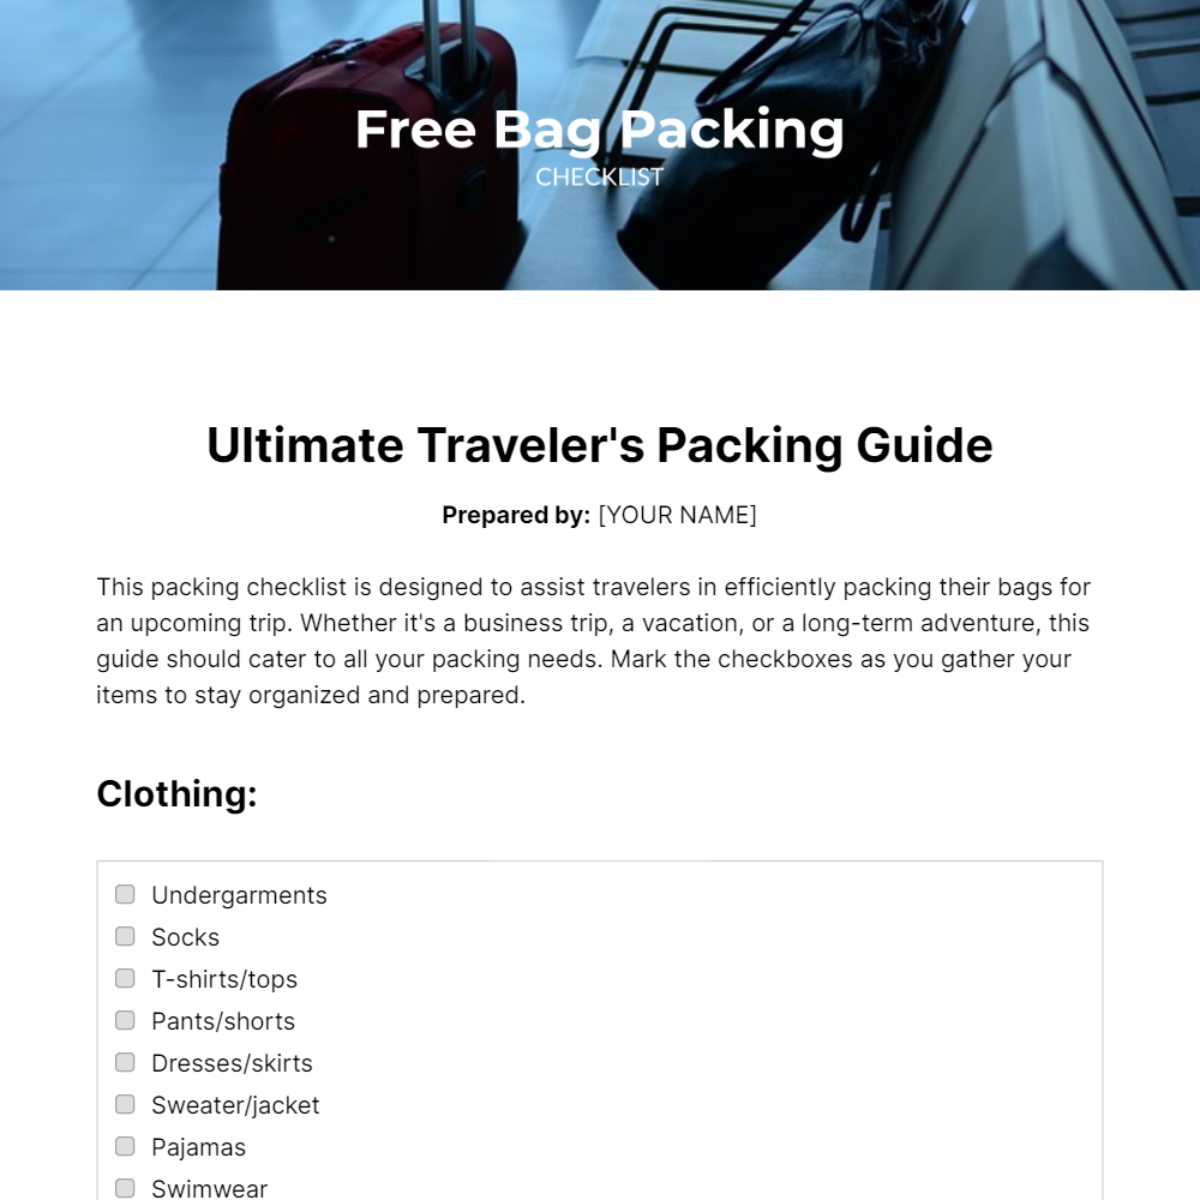 Bag Packing Checklist Template